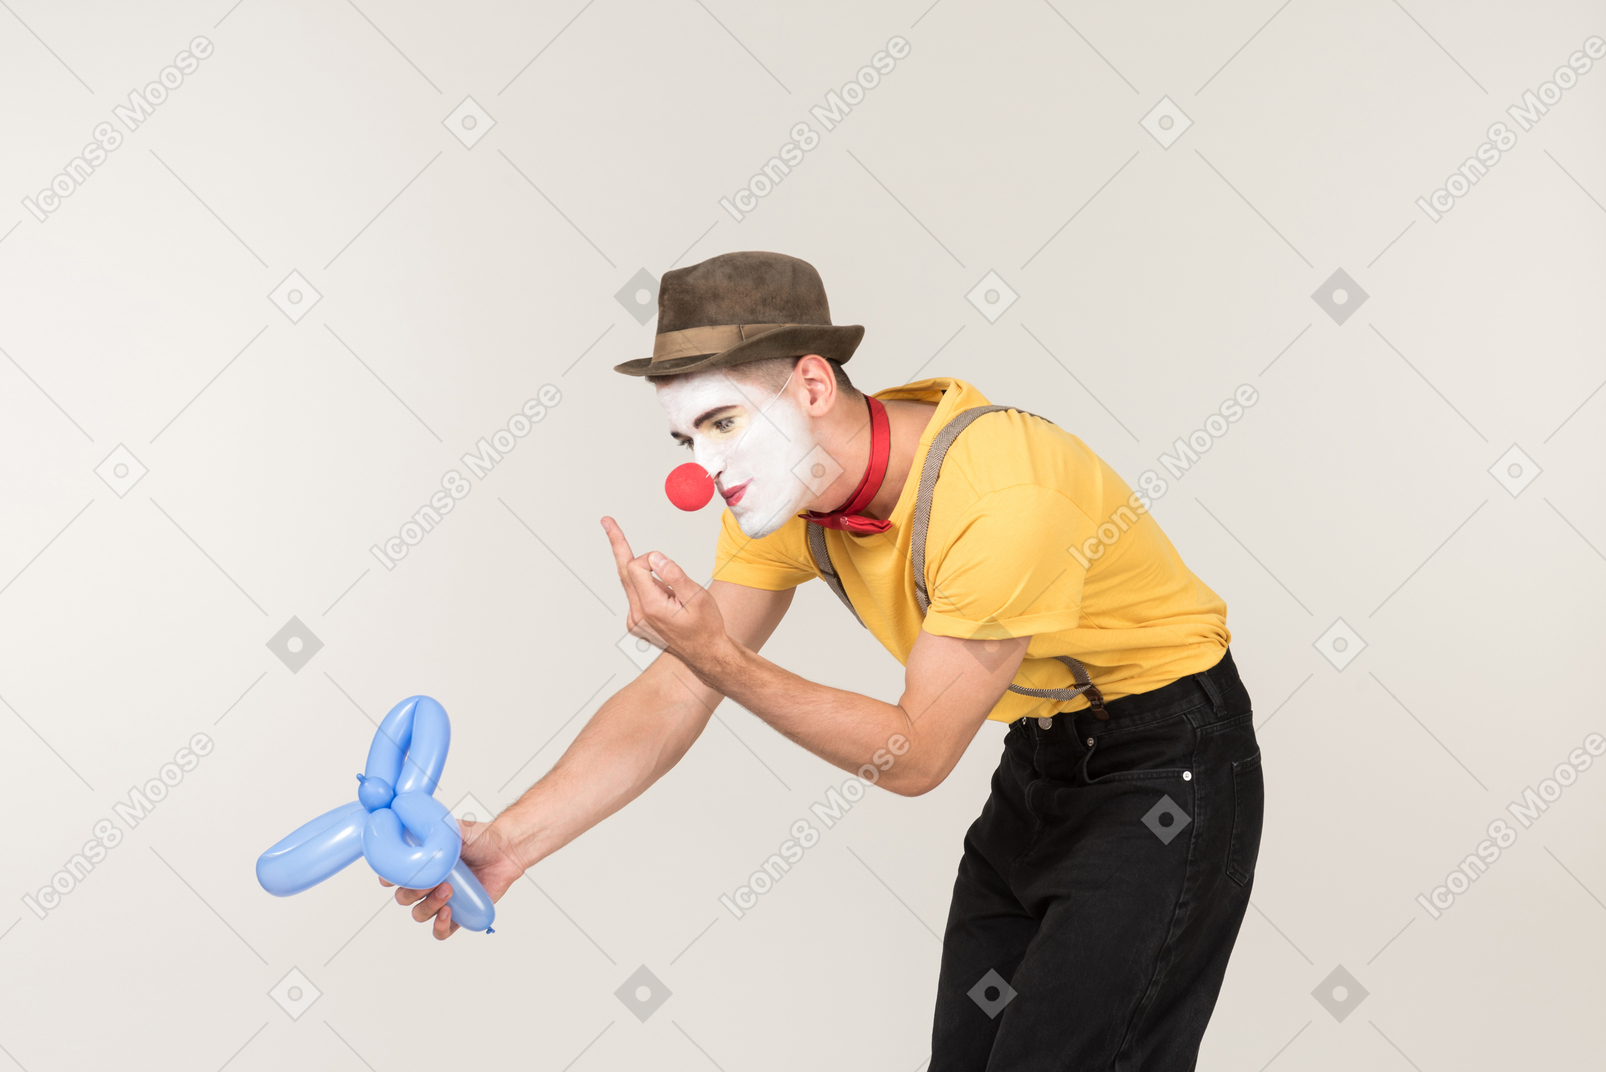 Male clown showing fuck to balloon figure he's holding